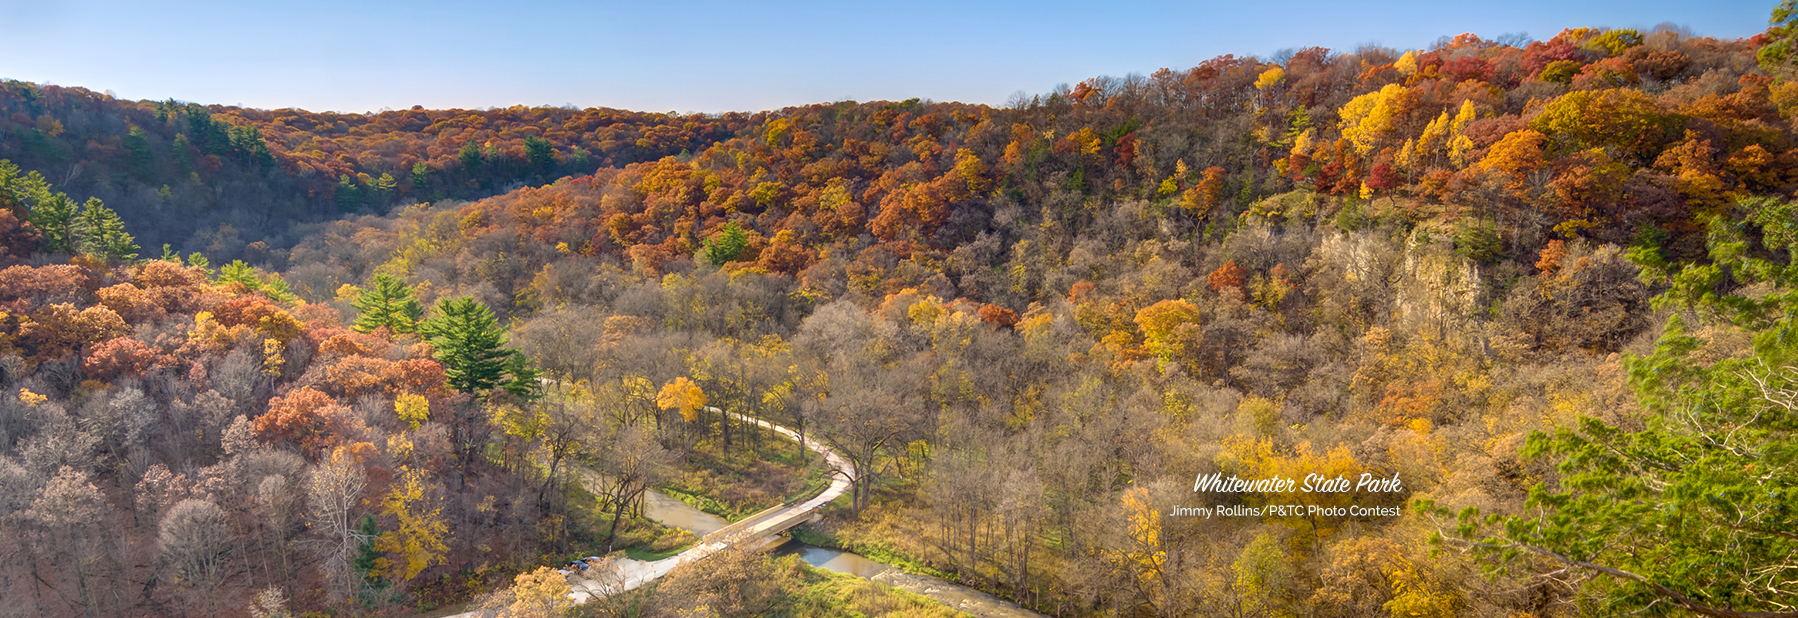 Landscape photo of the Whitewater valley with fall color bluffs